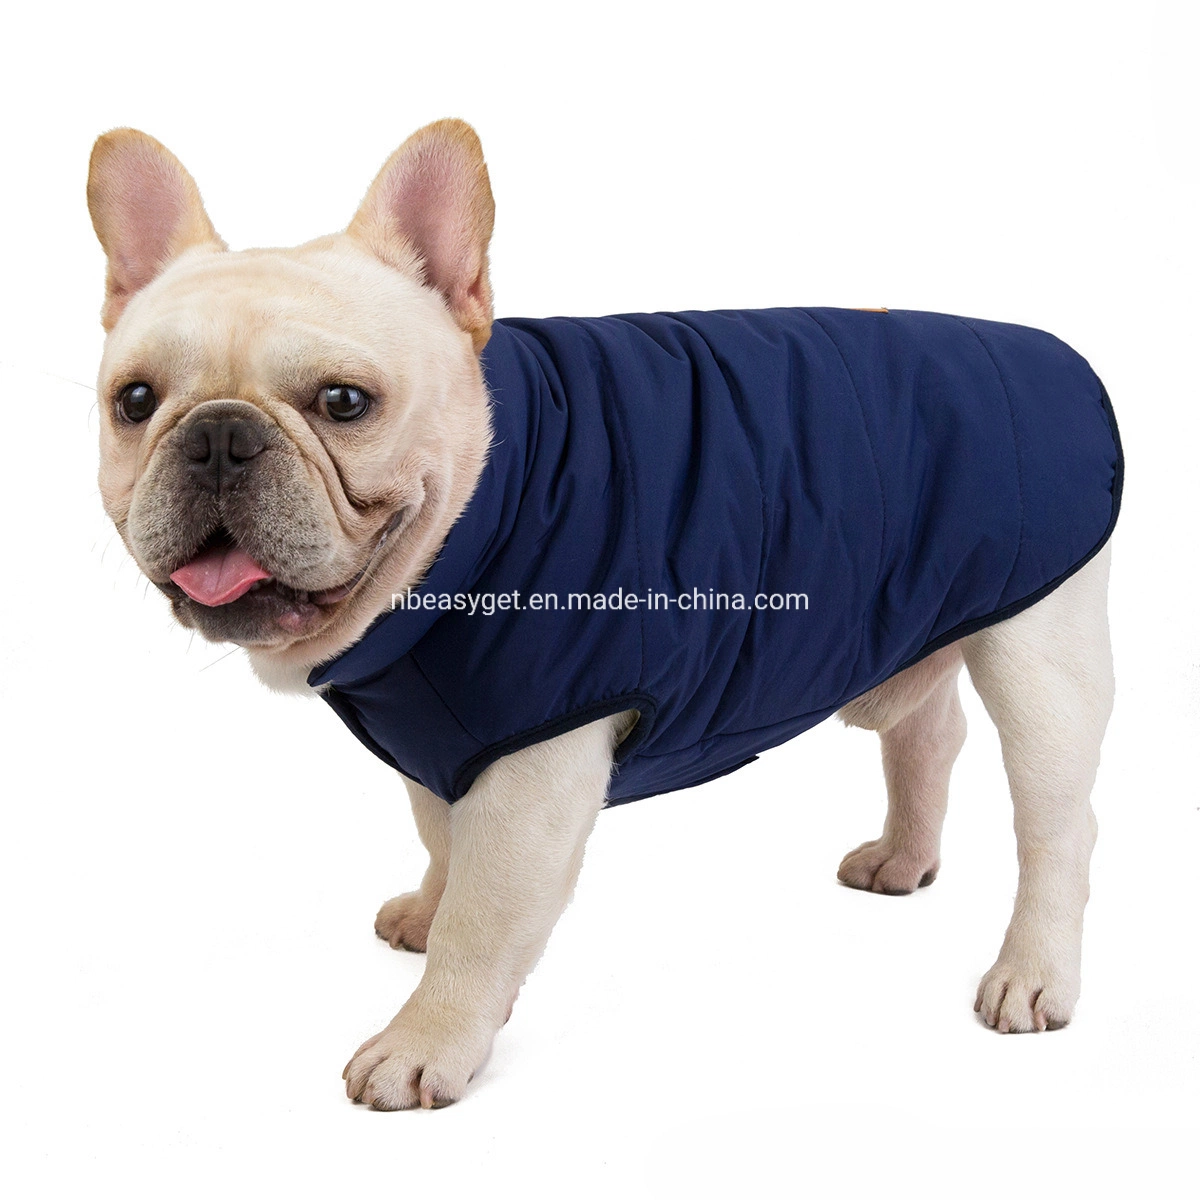 Windproof Dog Winter Coat Waterproof Dog Jacket Warm Dog Vest Cold Weather Pet Apparel with 2 Layers Fleece Lined for Small Medium Large Dogs Esg12441